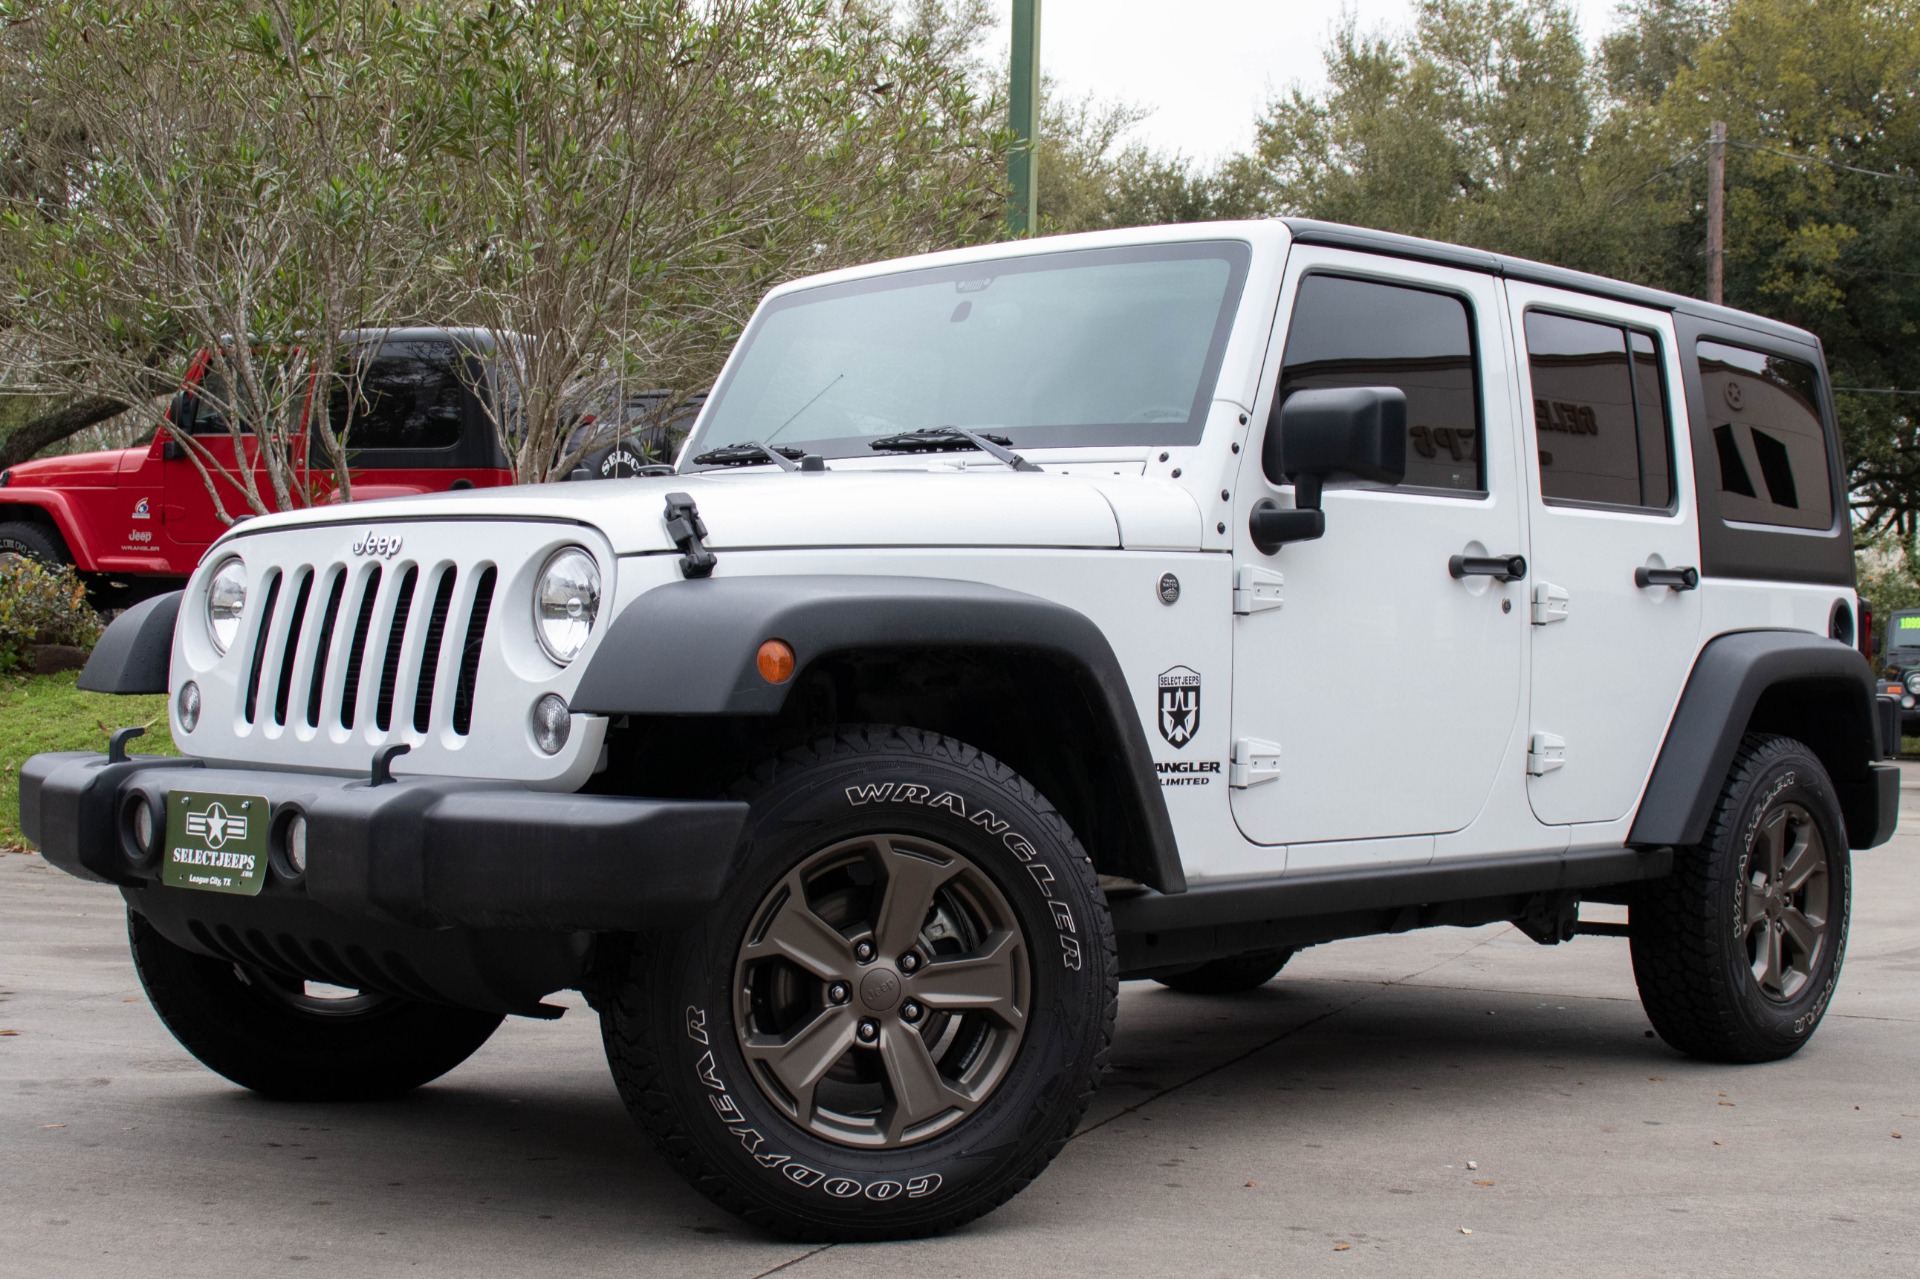 Whos Buying Jeeps and Why? A Psychographic Case Study 